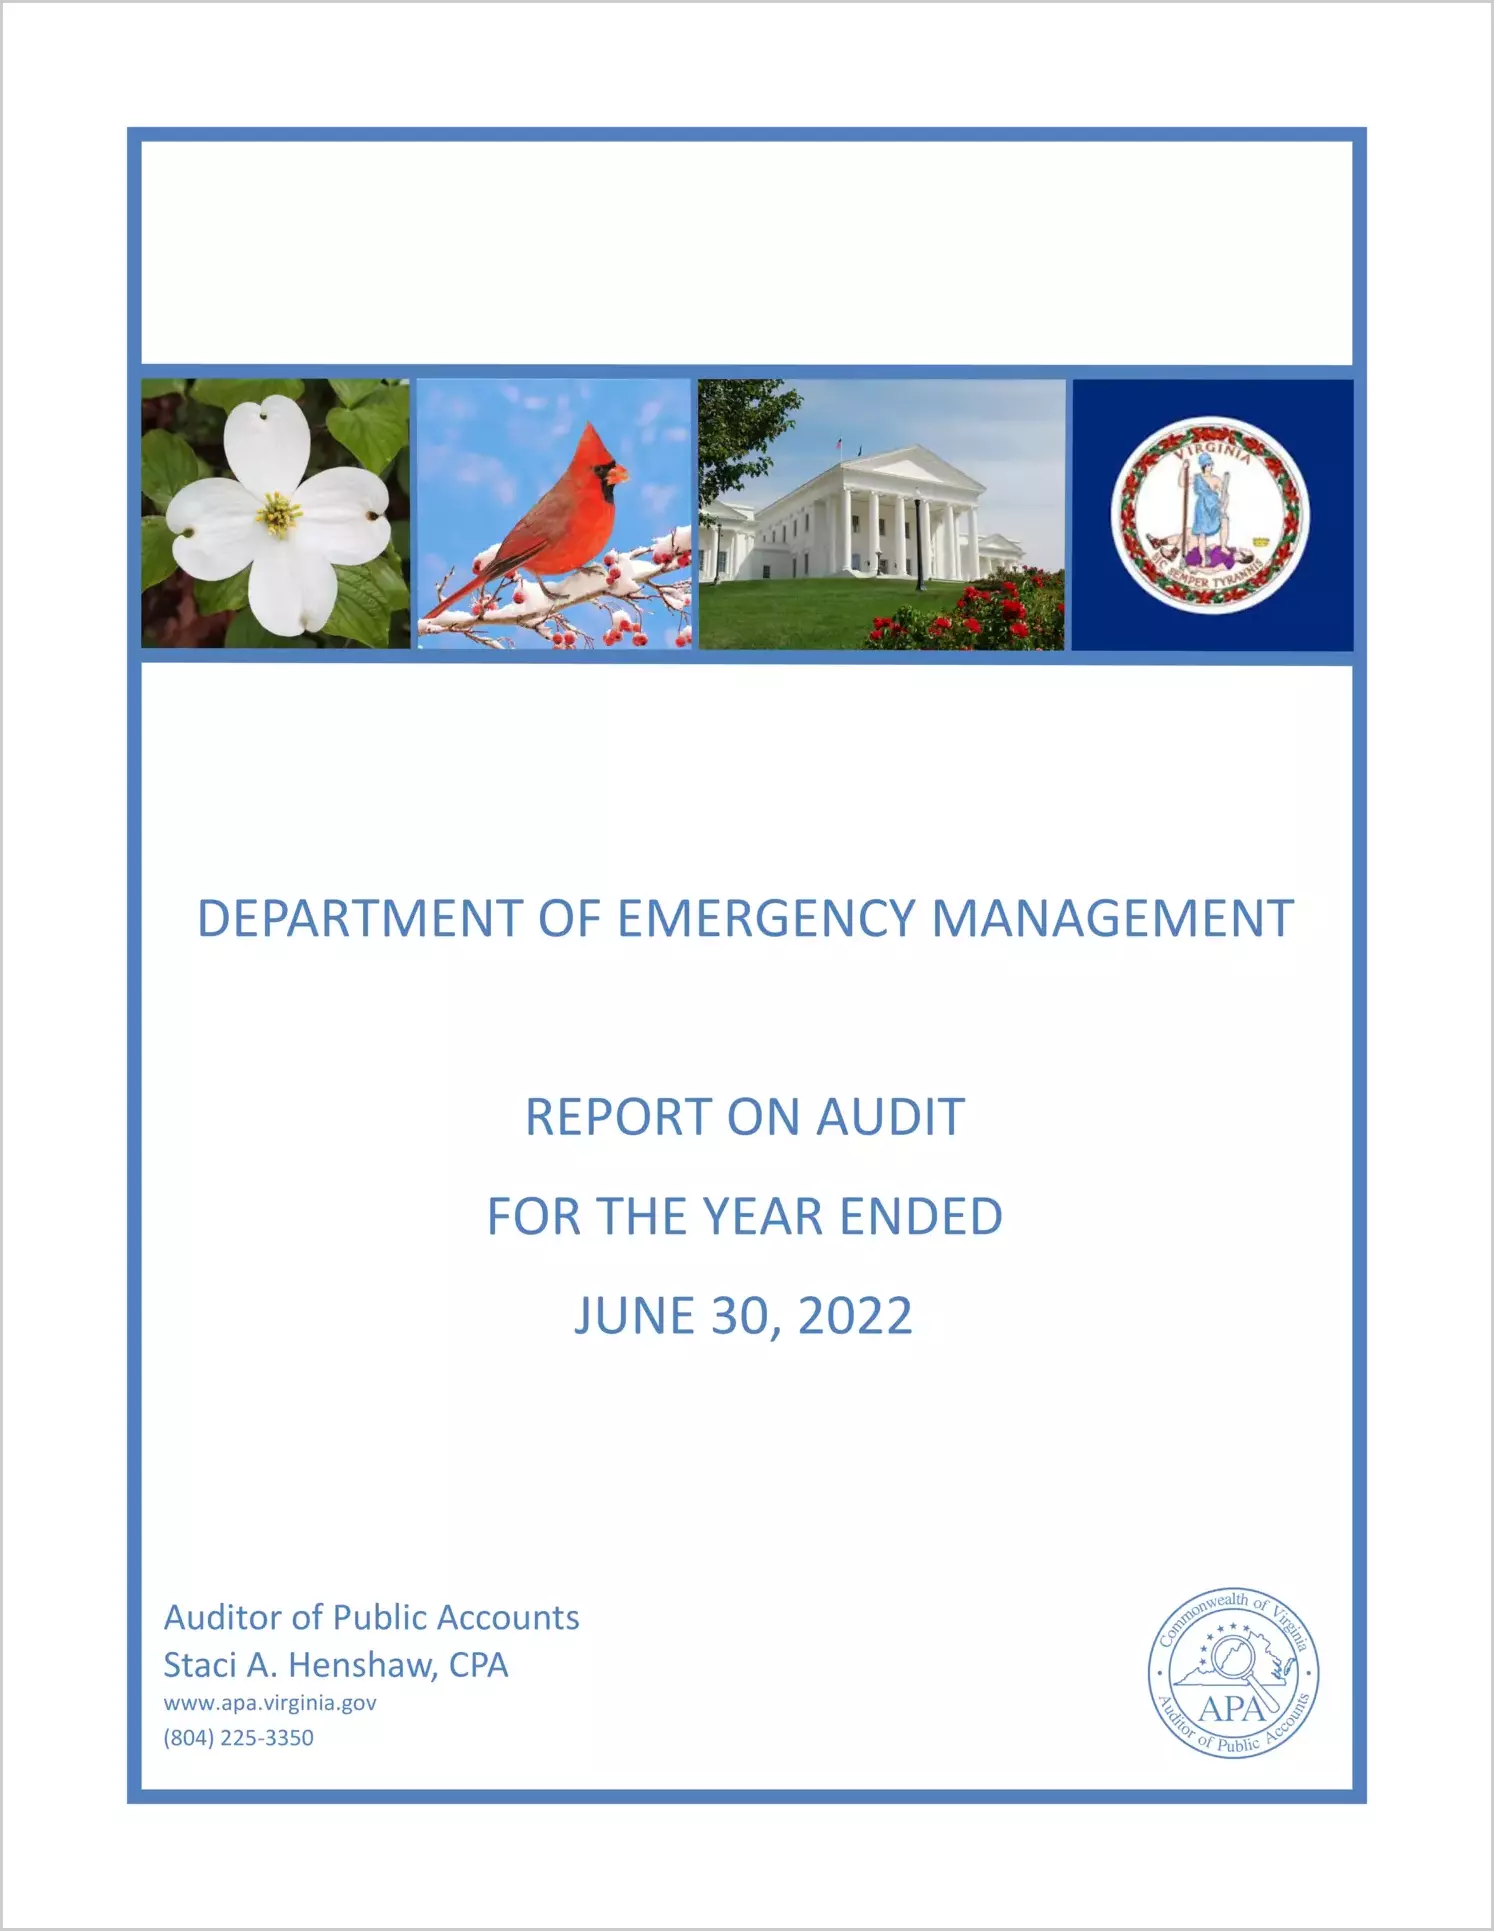 Department of Emergency Management for the year ended June 30, 2022